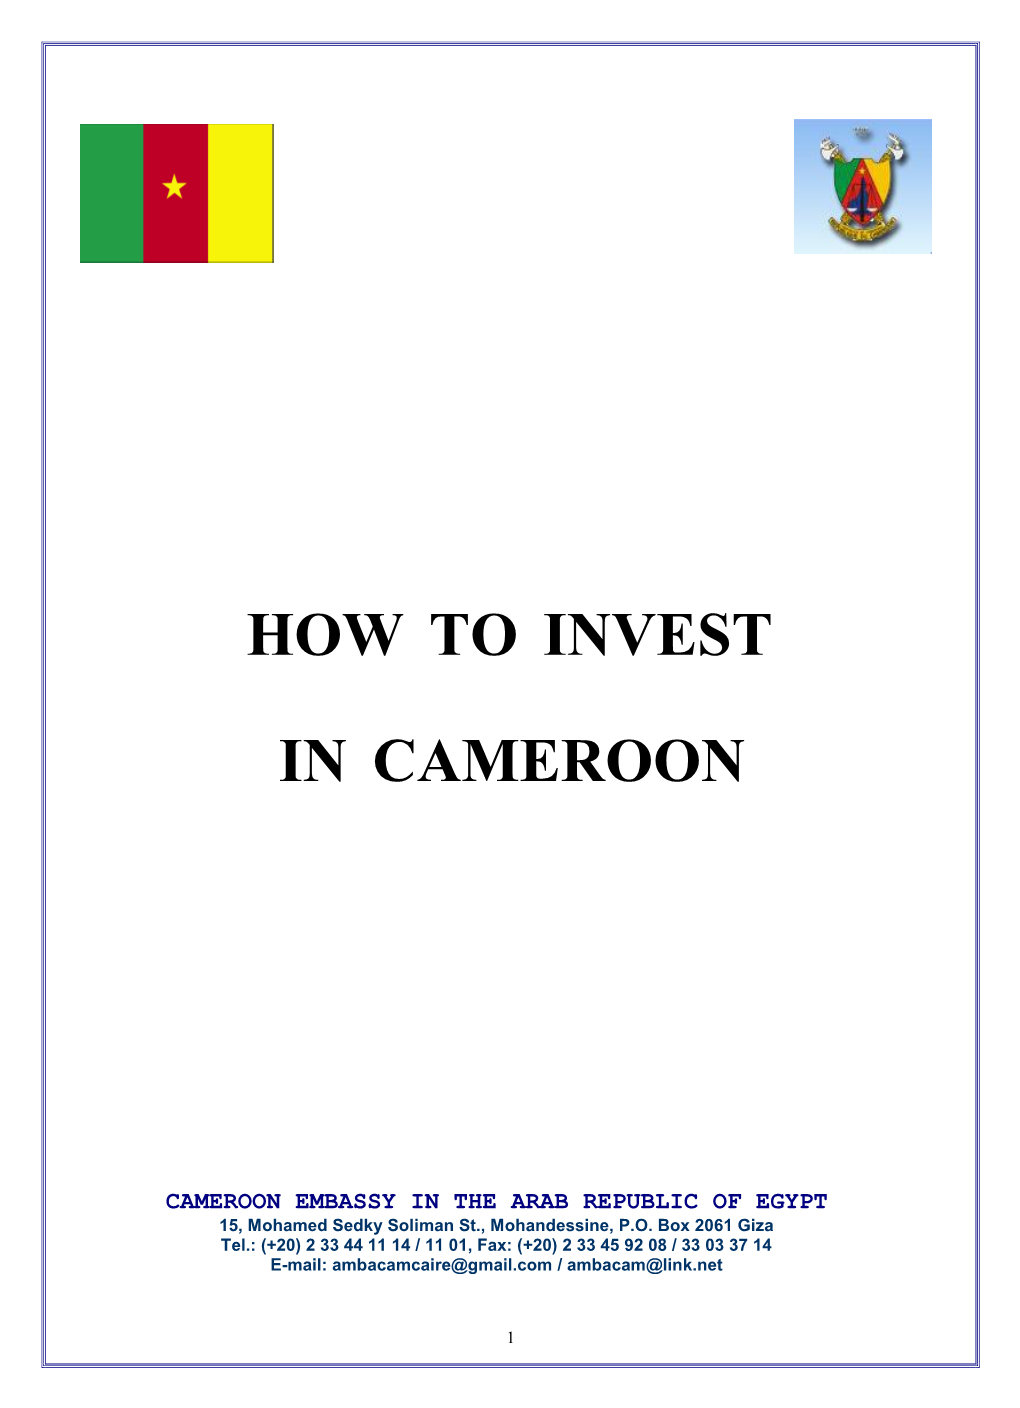 How to Invest in Cameroon